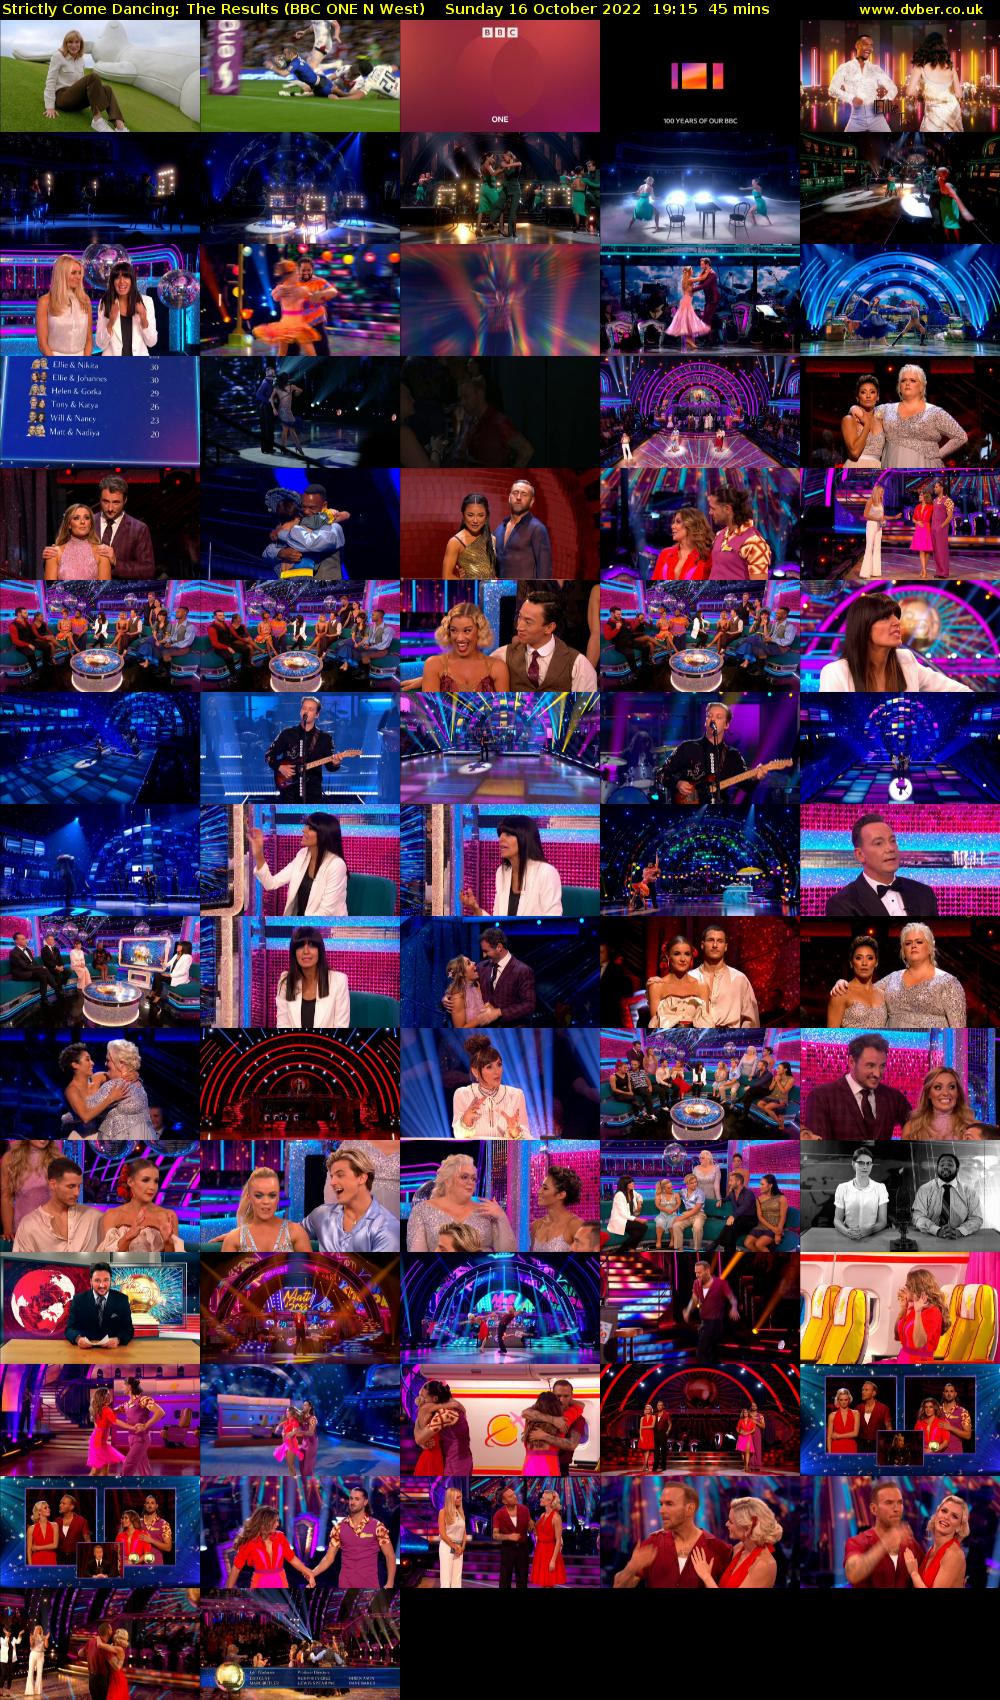 Strictly Come Dancing: The Results (BBC ONE N West) Sunday 16 October 2022 19:15 - 20:00